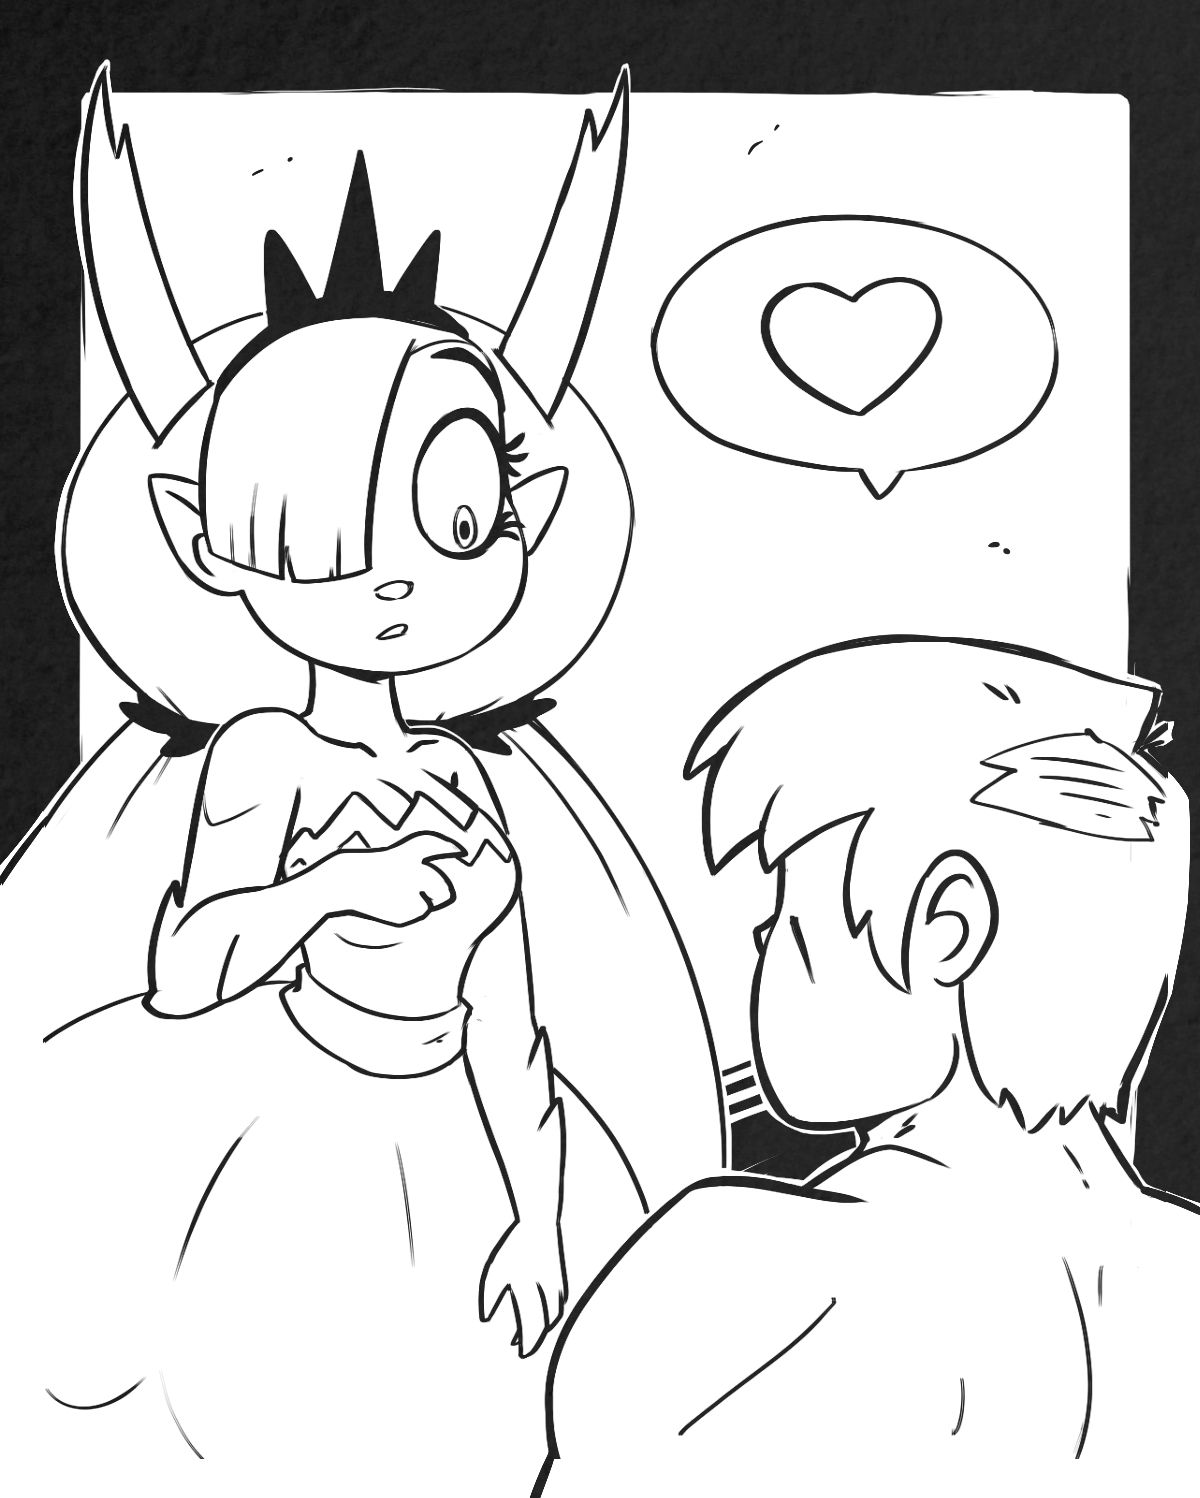 Markapoo - ADULTS ONLY 45